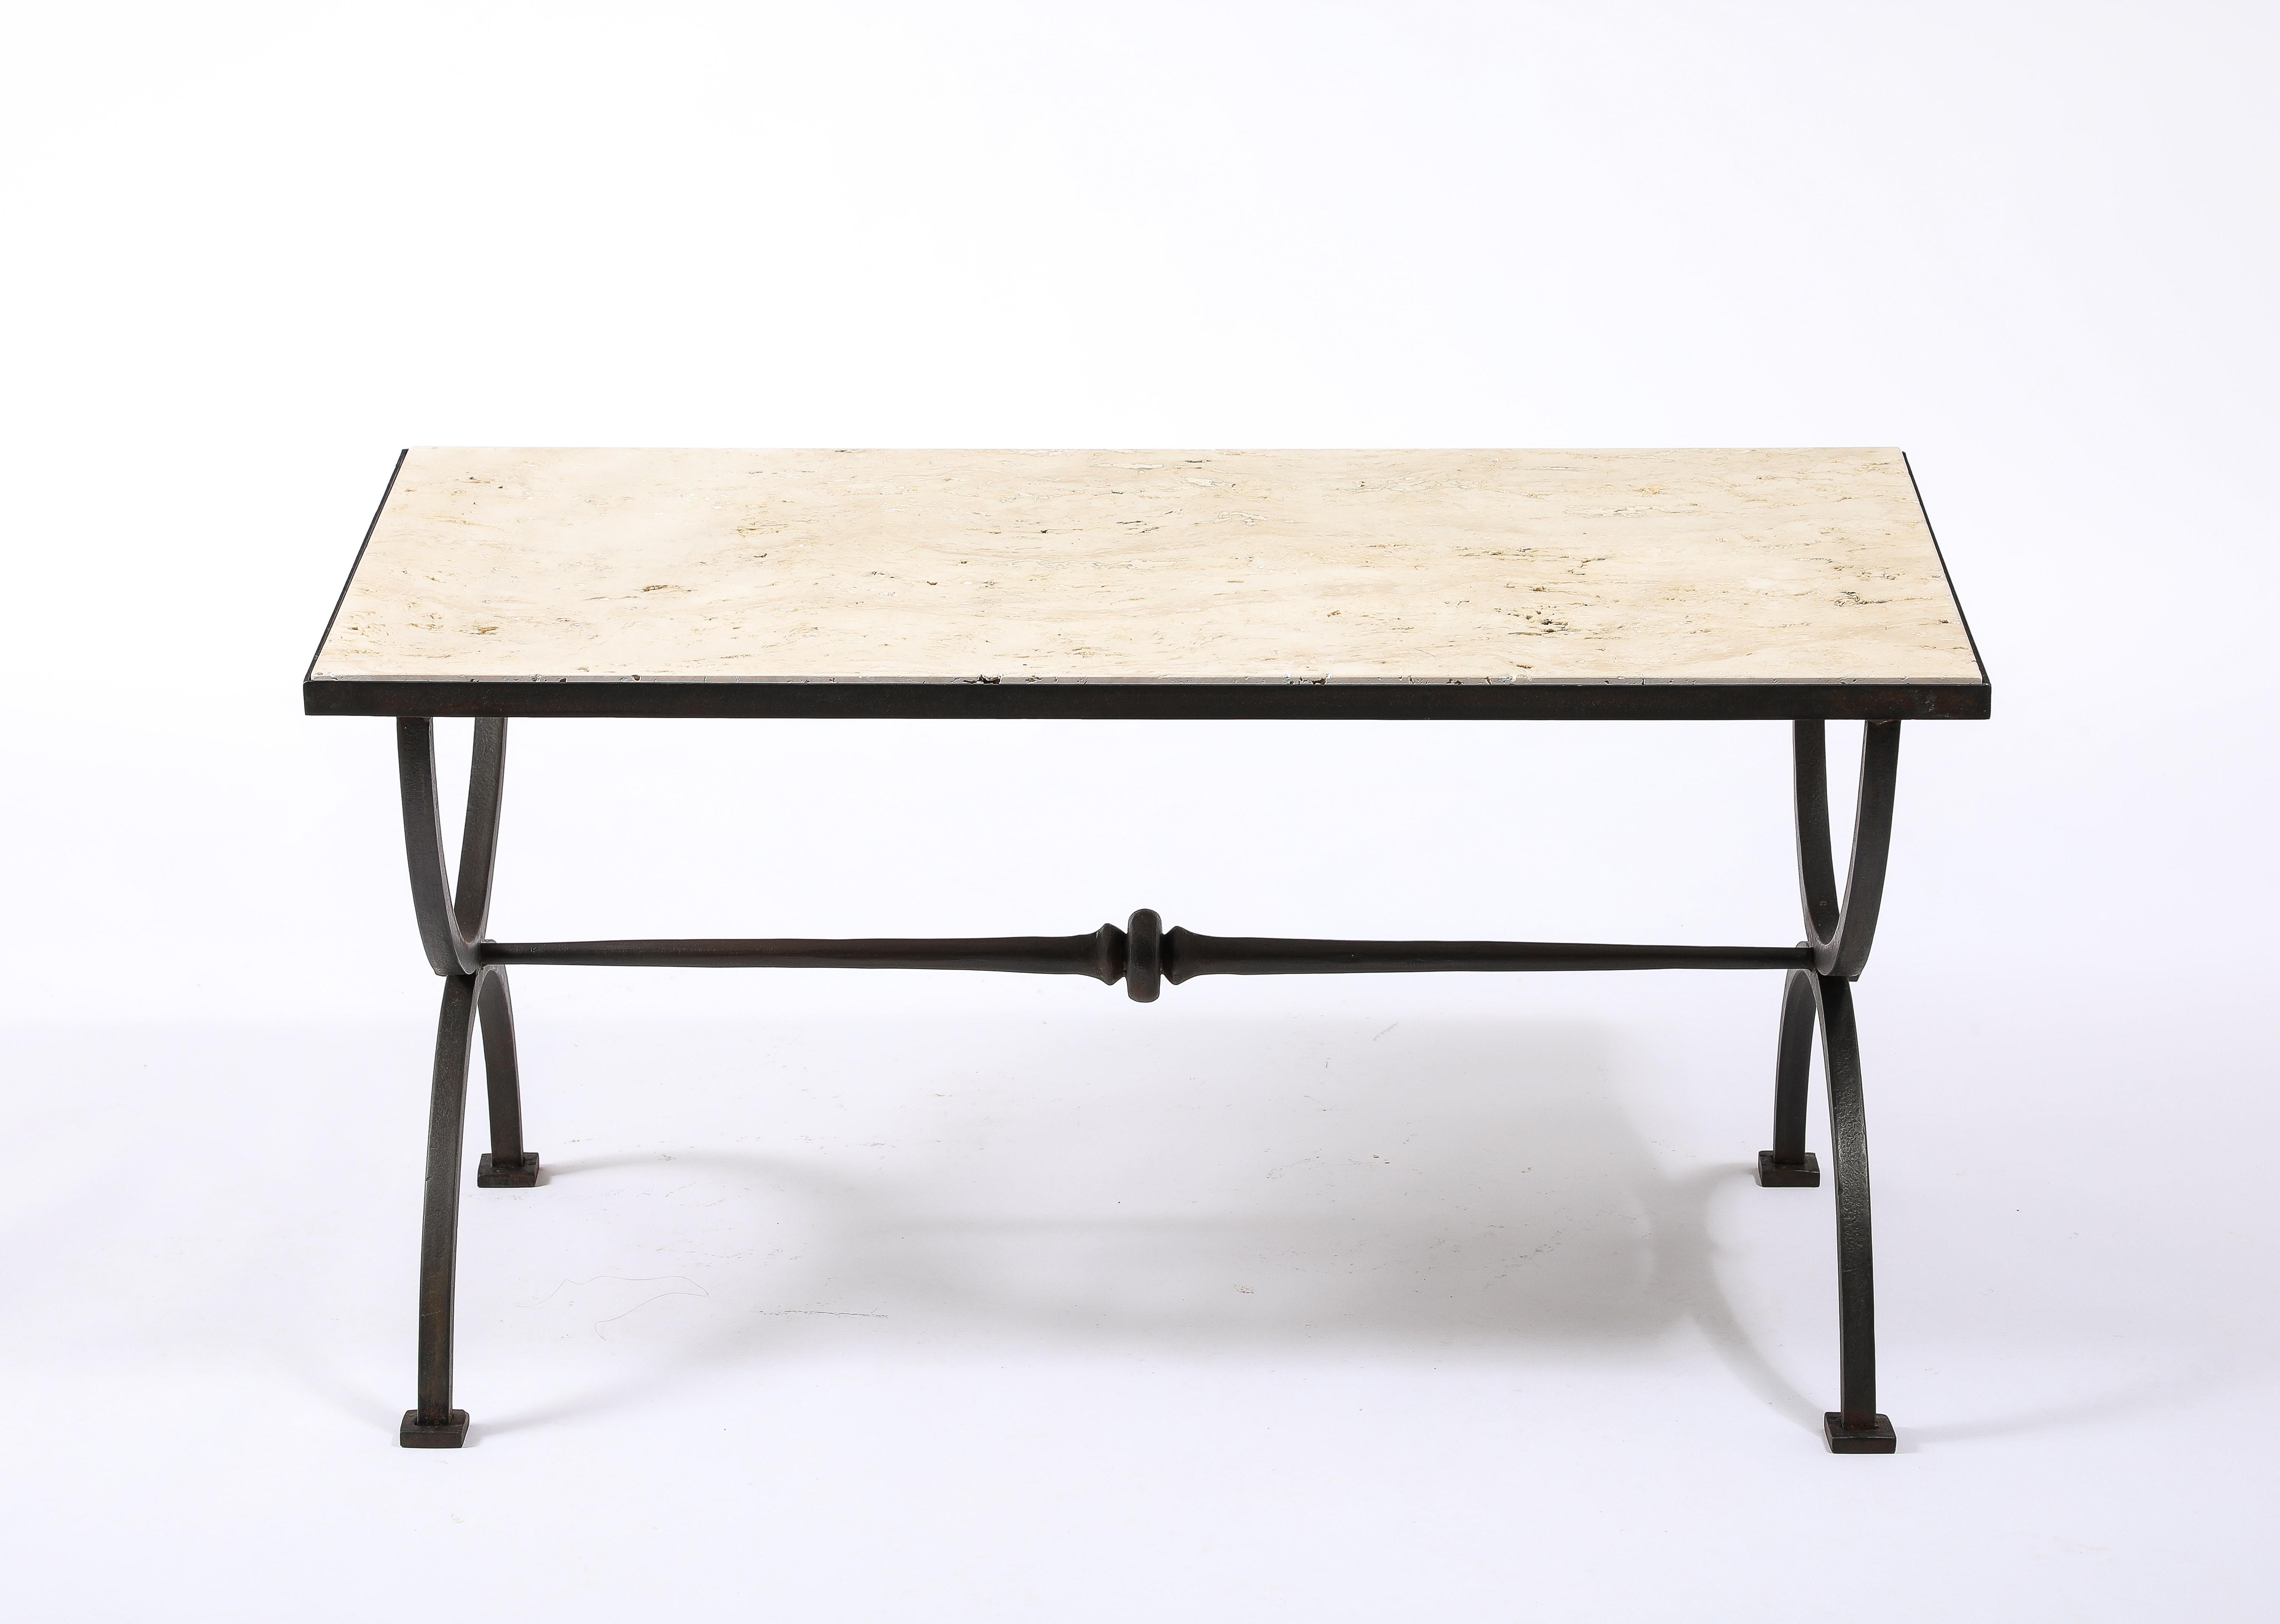 Substantial wrought iron and Travertine coffee table made of square bar with a double tapered stretcher.
